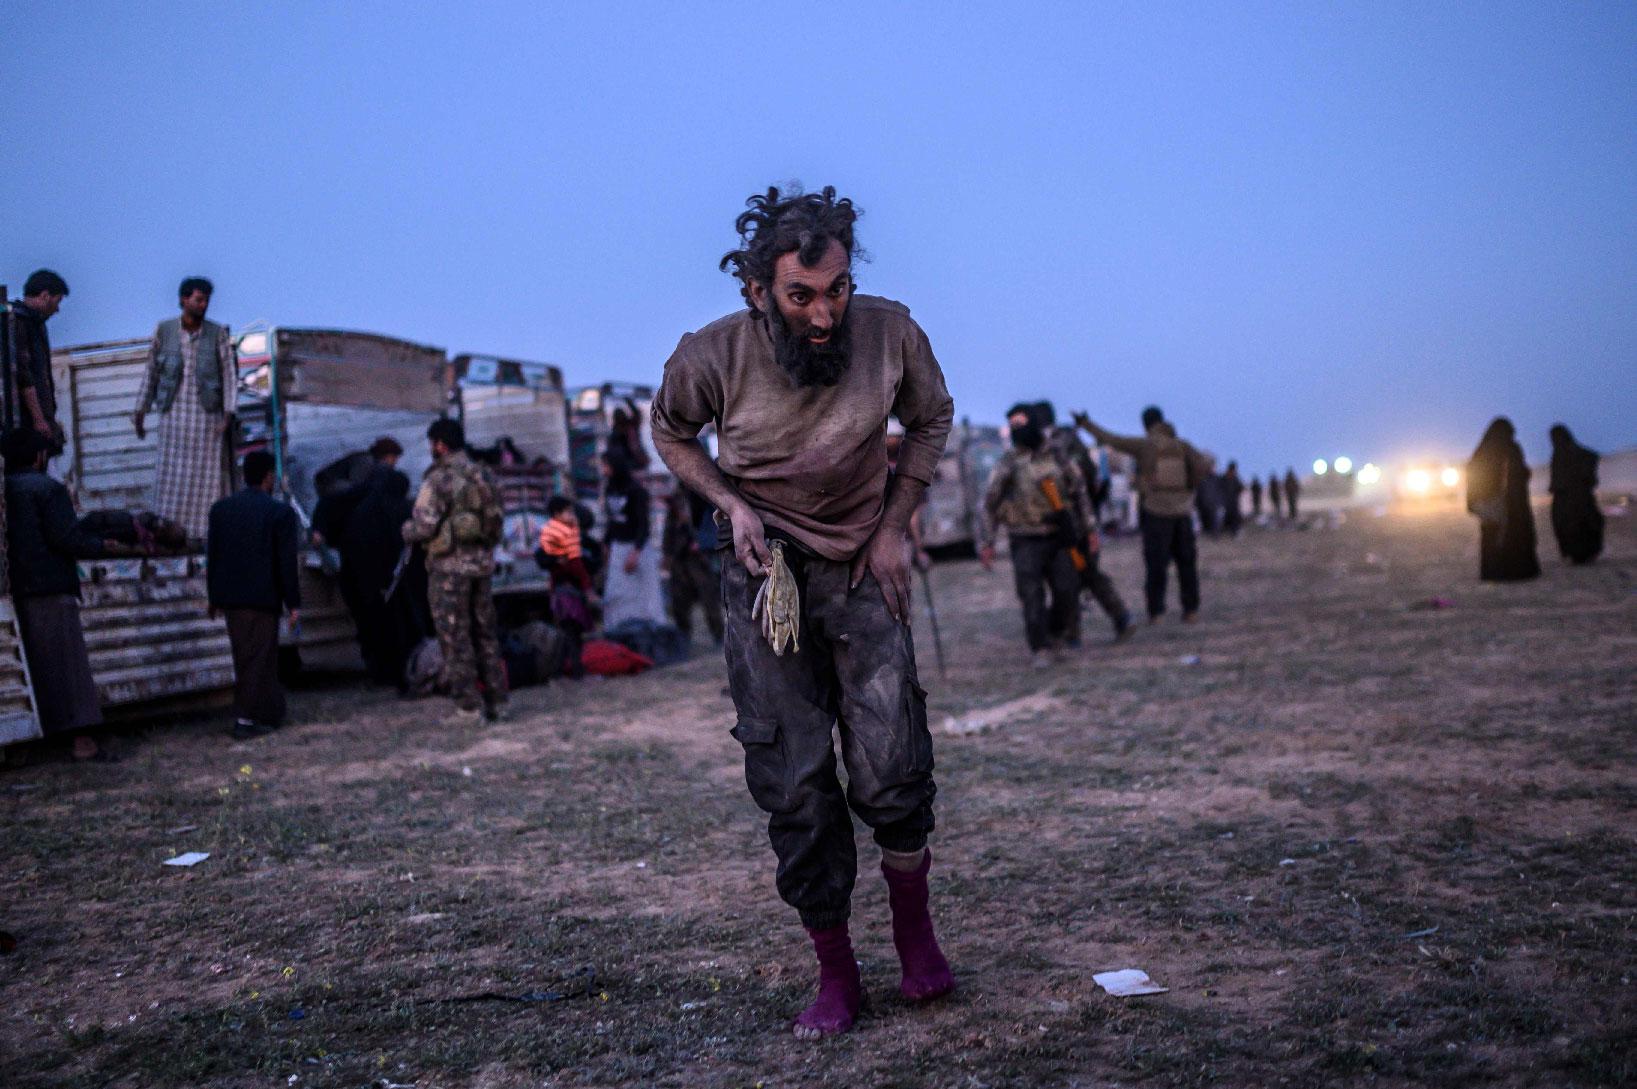 A man suspected of belonging to the Islamic State (IS) group walks past members of the Kurdish-led Syrian Democratic Forces (SDF) just after leaving IS' last holdout of Baghouz, in the eastern Syrian province of Deir Ezzor on March 4, 2019.